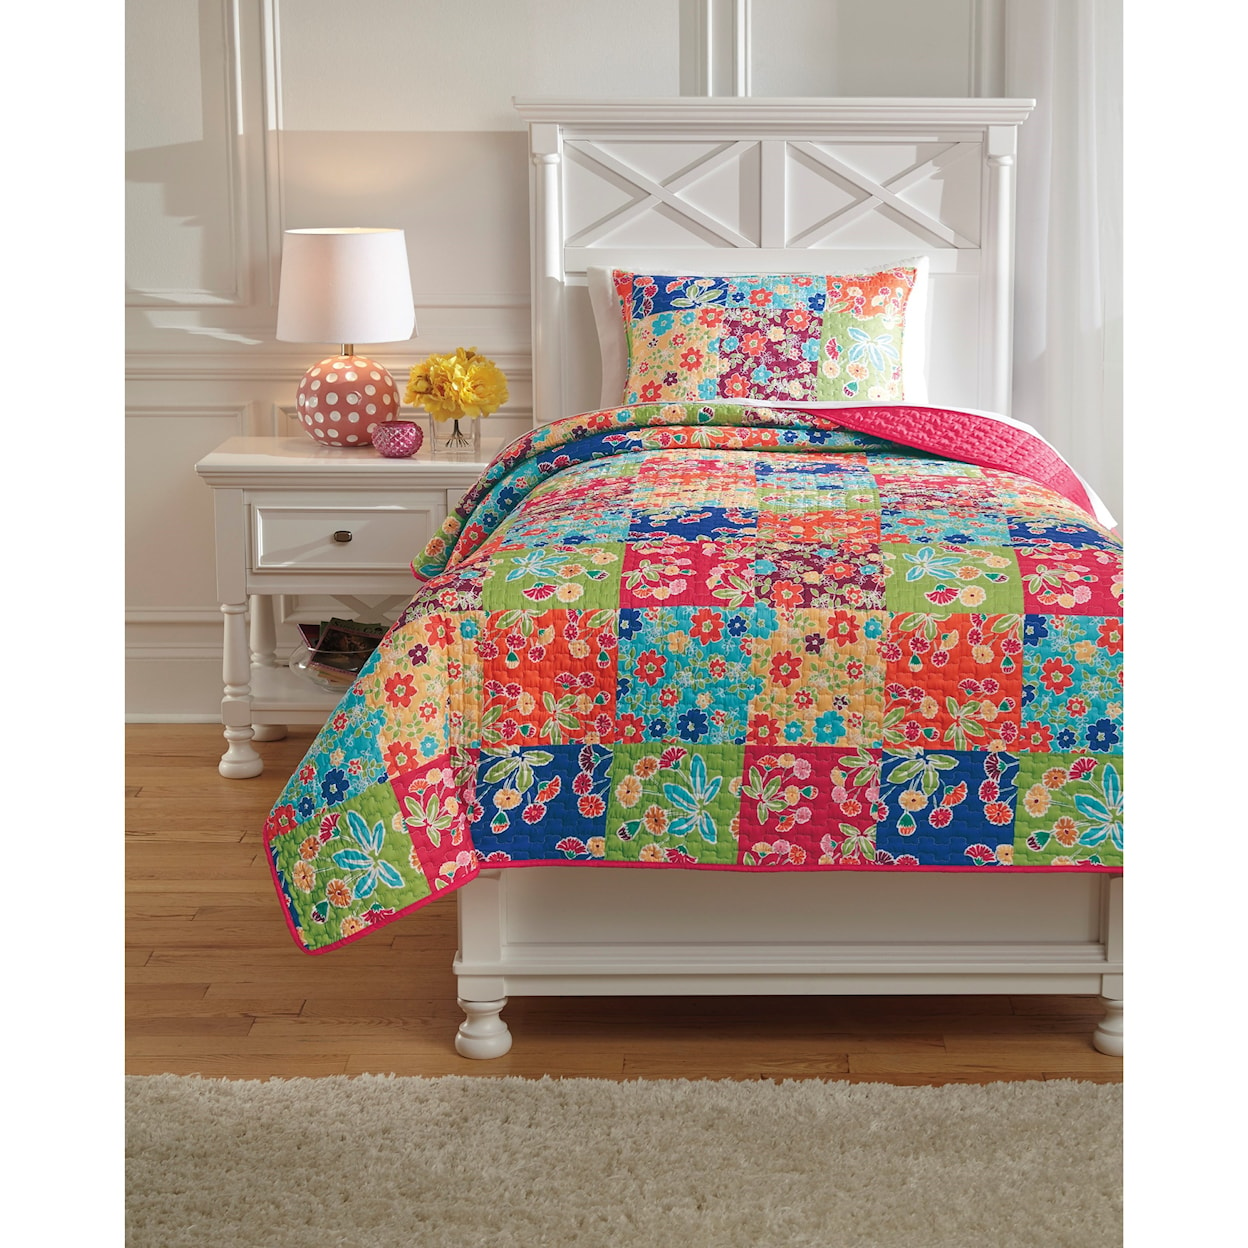 Signature Design by Ashley Bedding Sets Twin Belle Chase Quilt Set